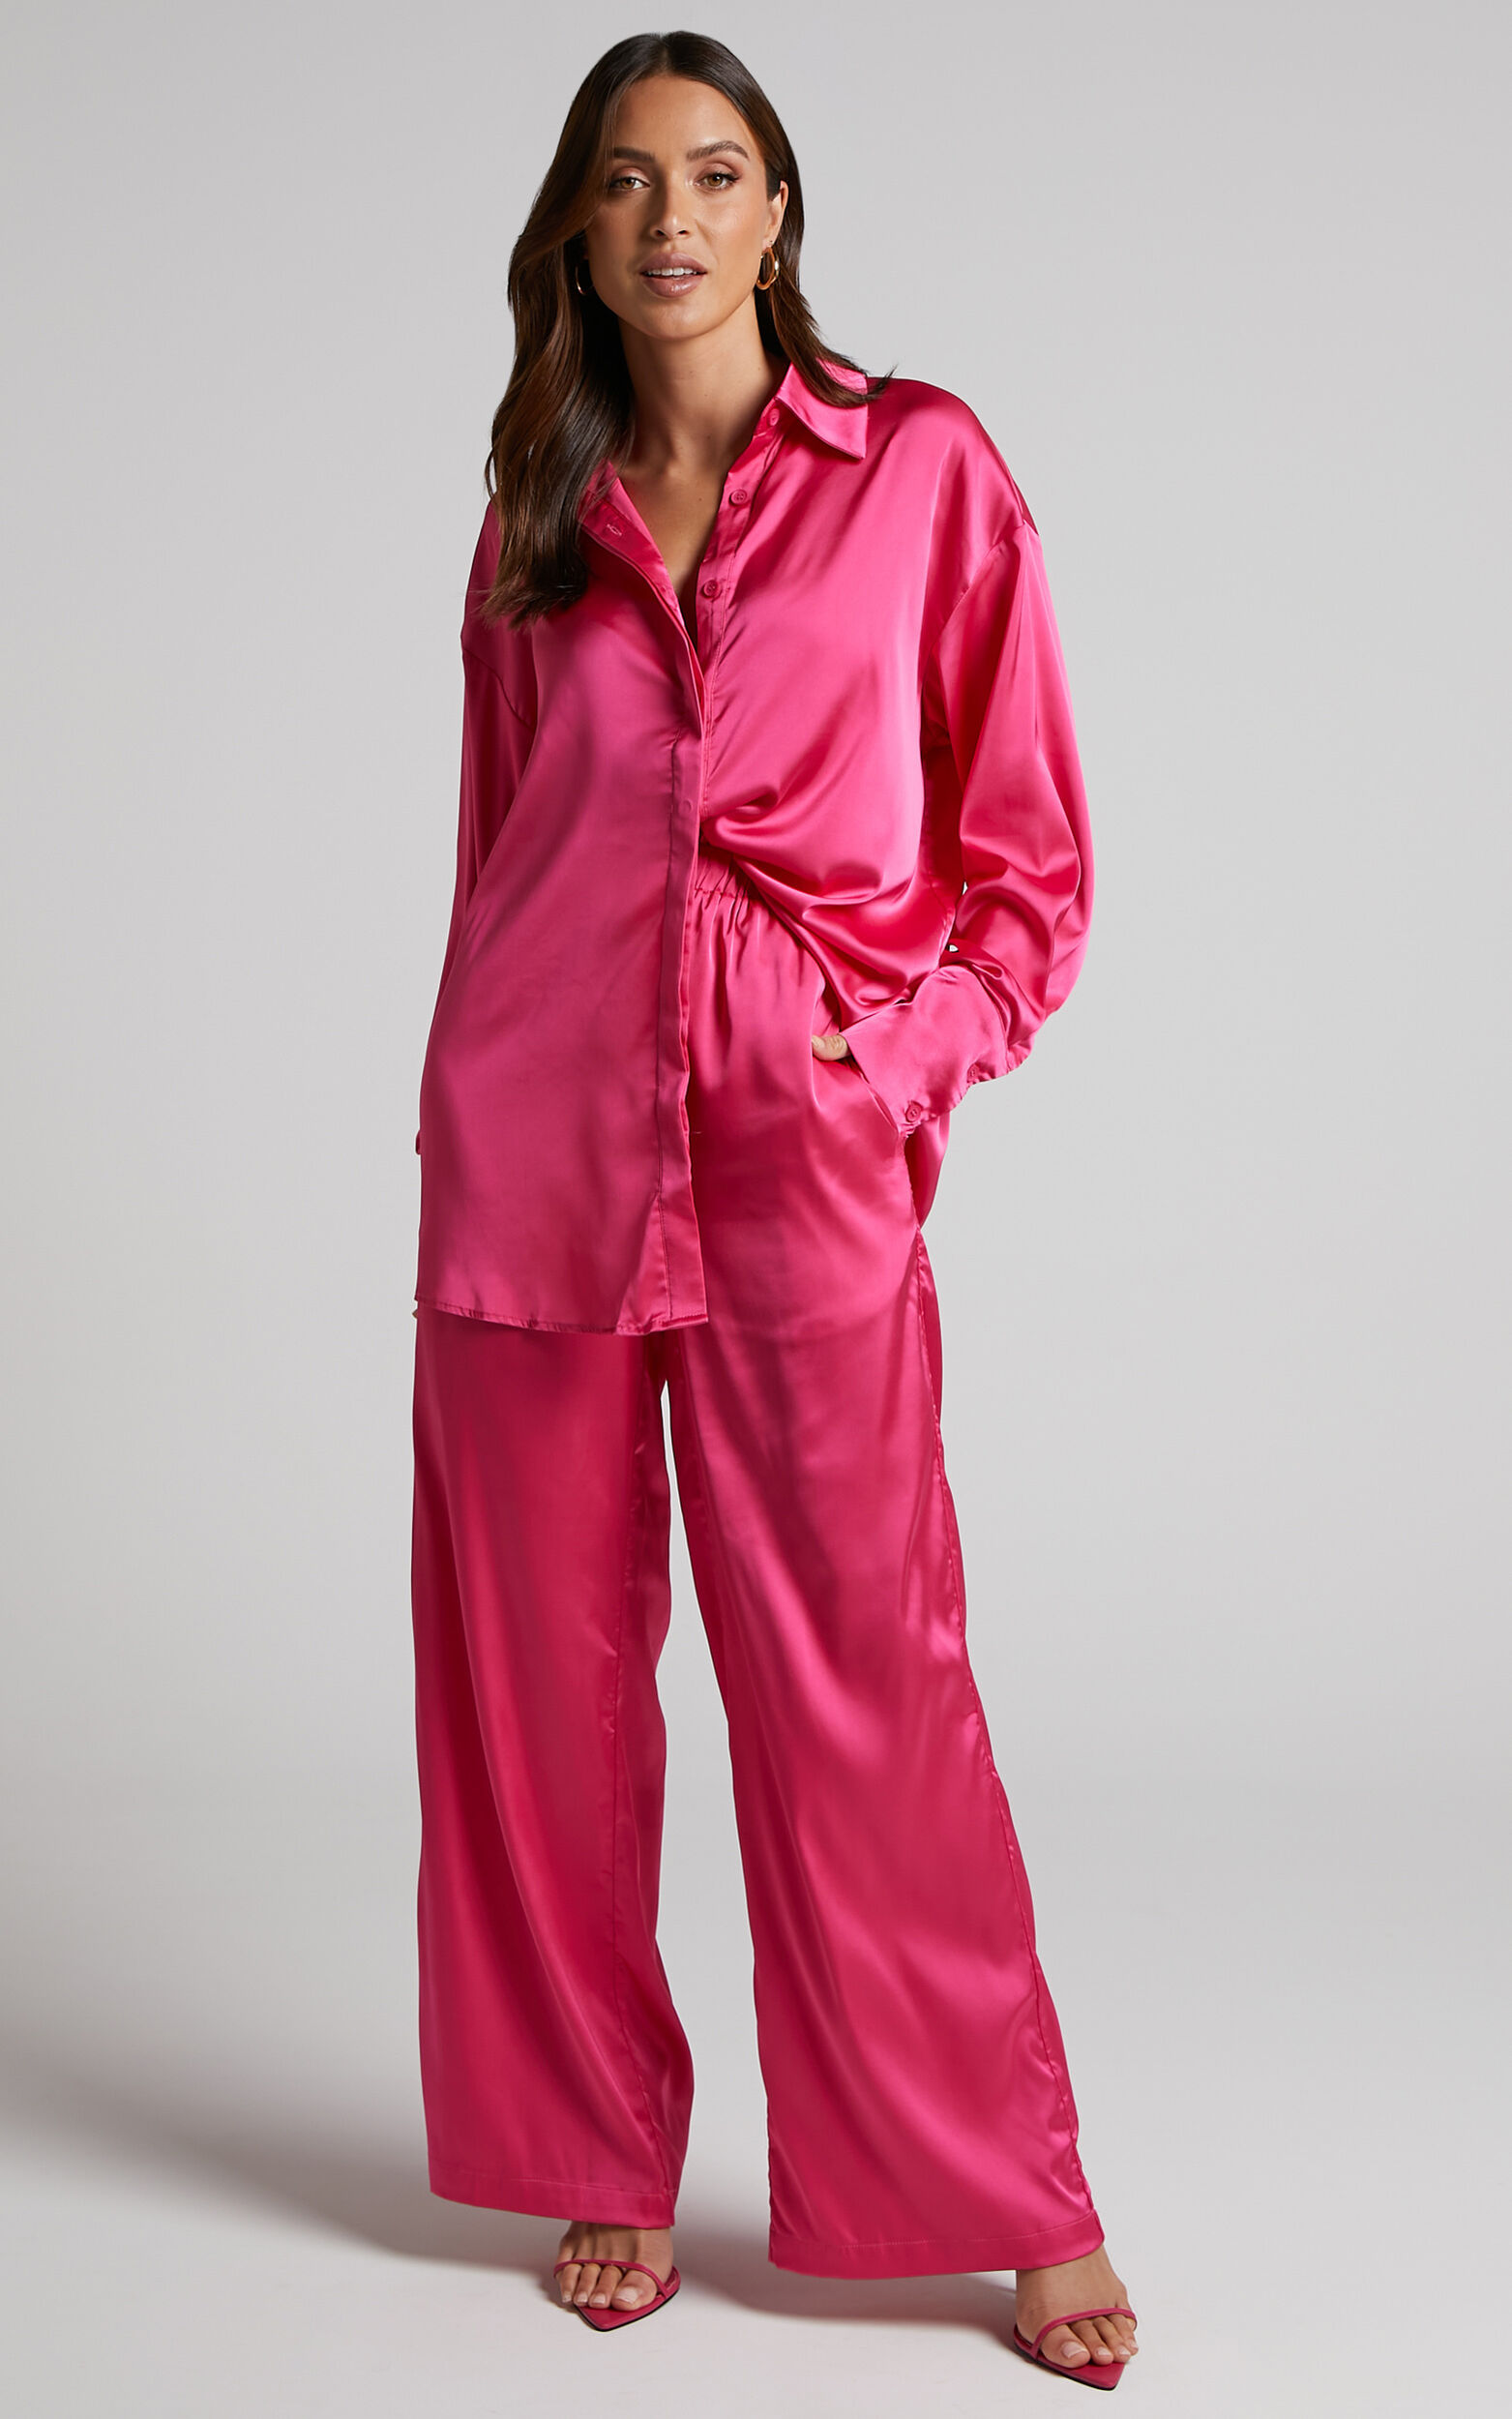 Trianna Two Piece Set - Oversized Satin Shirt and Wide Leg Pants in Pink - 04, PNK1